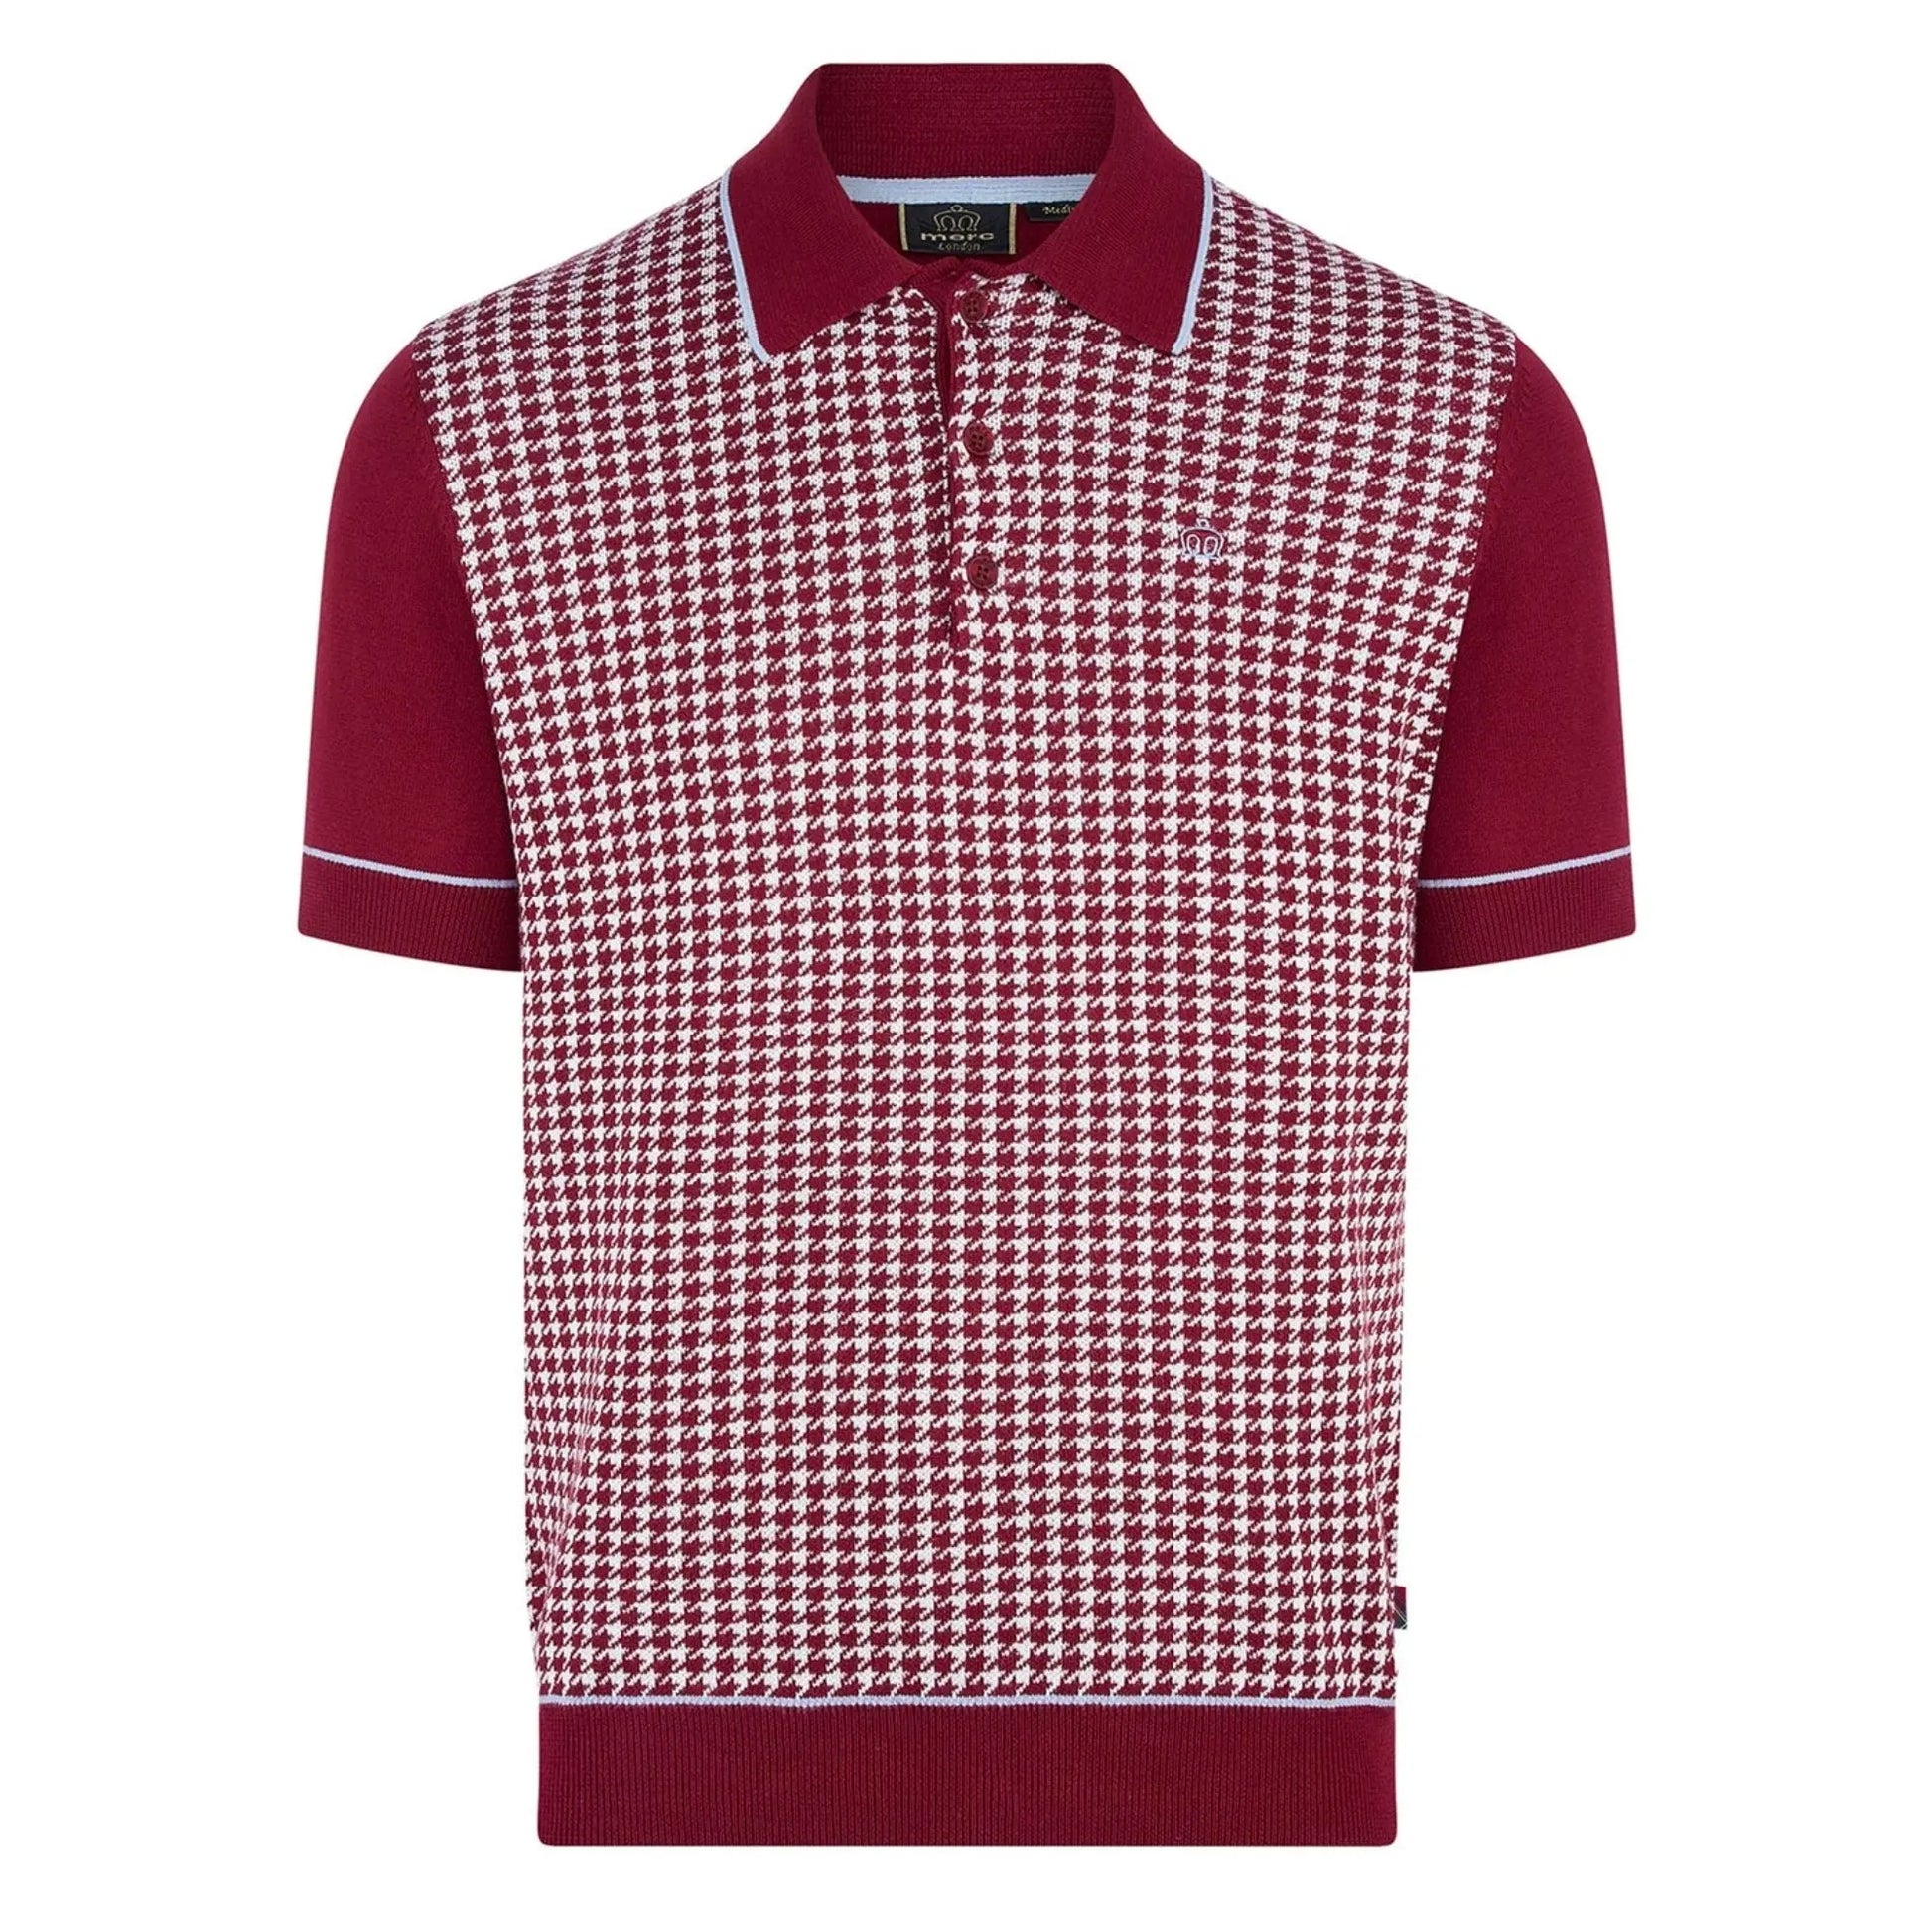 Buy Merc London Cavendish Houndstooth Knitted Polo - Burgundy | Short-Sleeved Polo Shirtss at Woven Durham